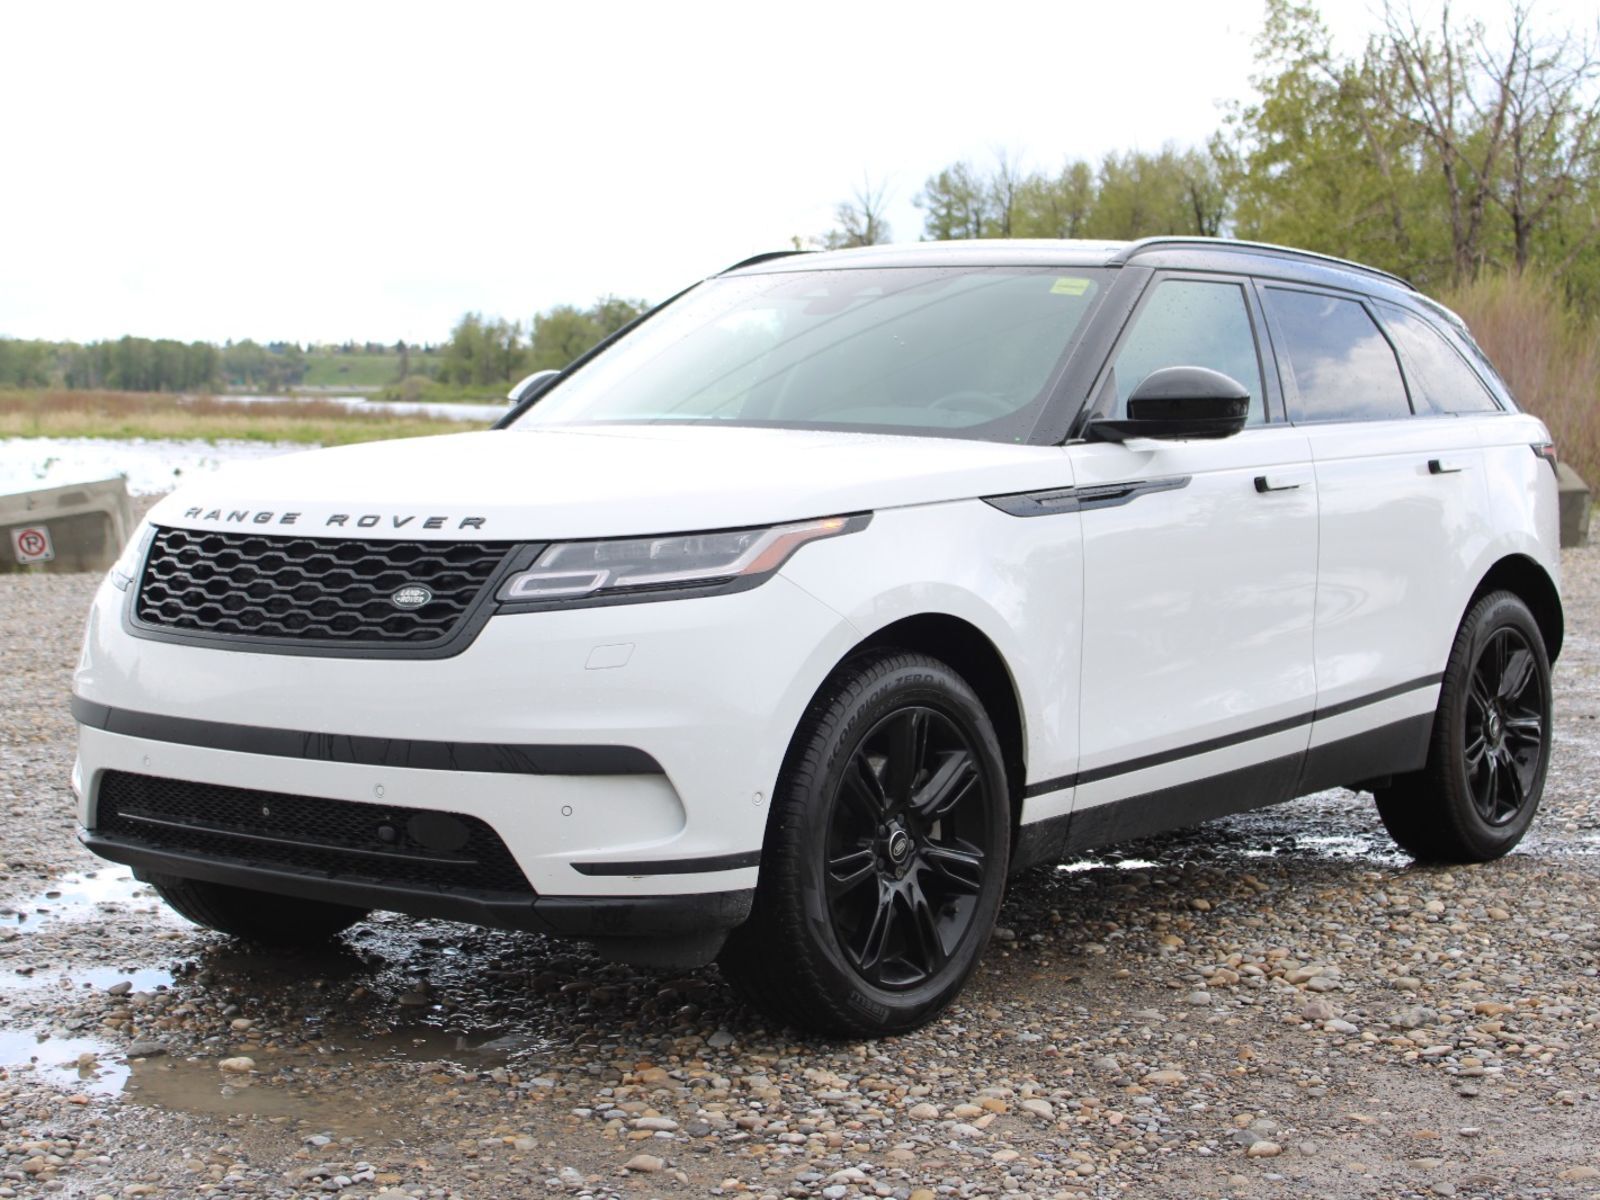 2021 Land Rover Range Rover Velar BRAND NEW TIRES - ONE OWNER, NO ACCIDENTS!!